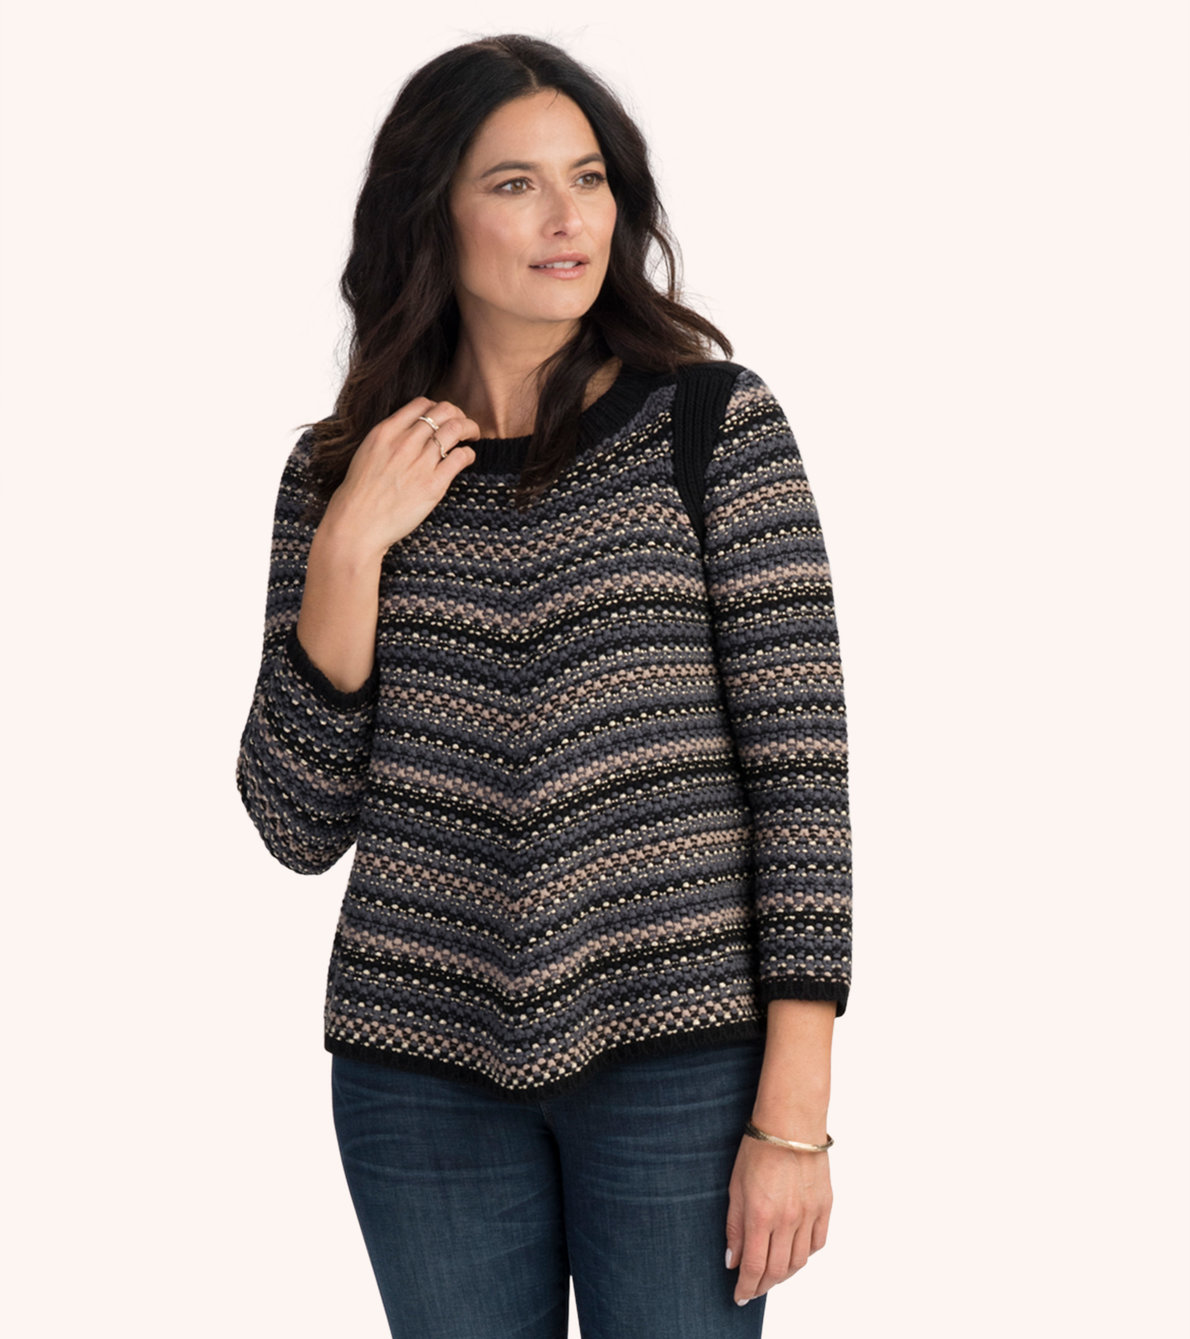 View larger image of Charcoal Chevron Stripes Chelsie Sweater